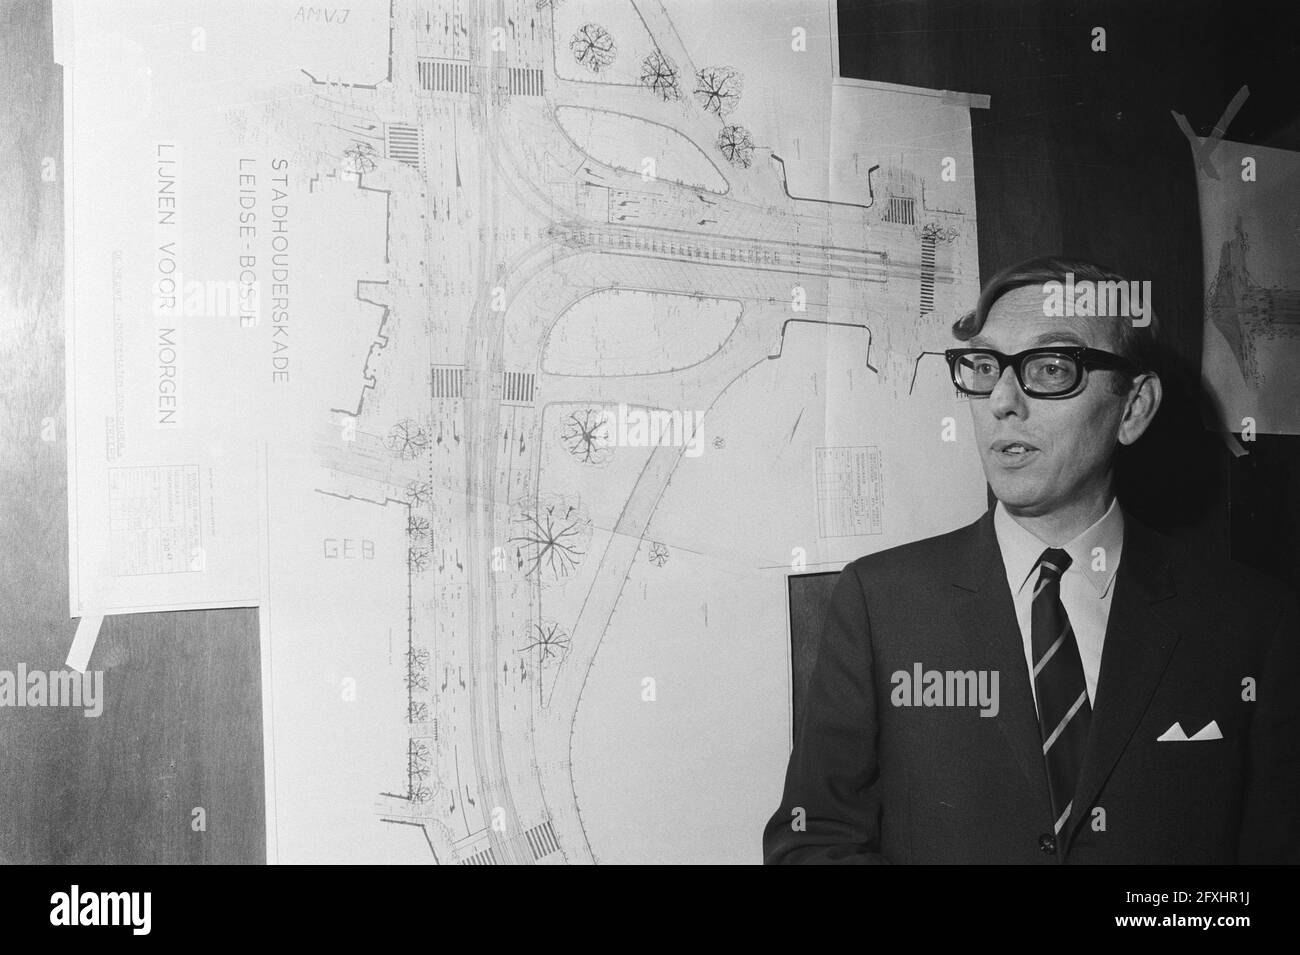 Alderman Brautigam in council chamber at a map, May 24, 1971, town halls, public transportation, press conferences, maps, aldermen, The Netherlands, 20th century press agency photo, news to remember, documentary, historic photography 1945-1990, visual stories, human history of the Twentieth Century, capturing moments in time Stock Photo